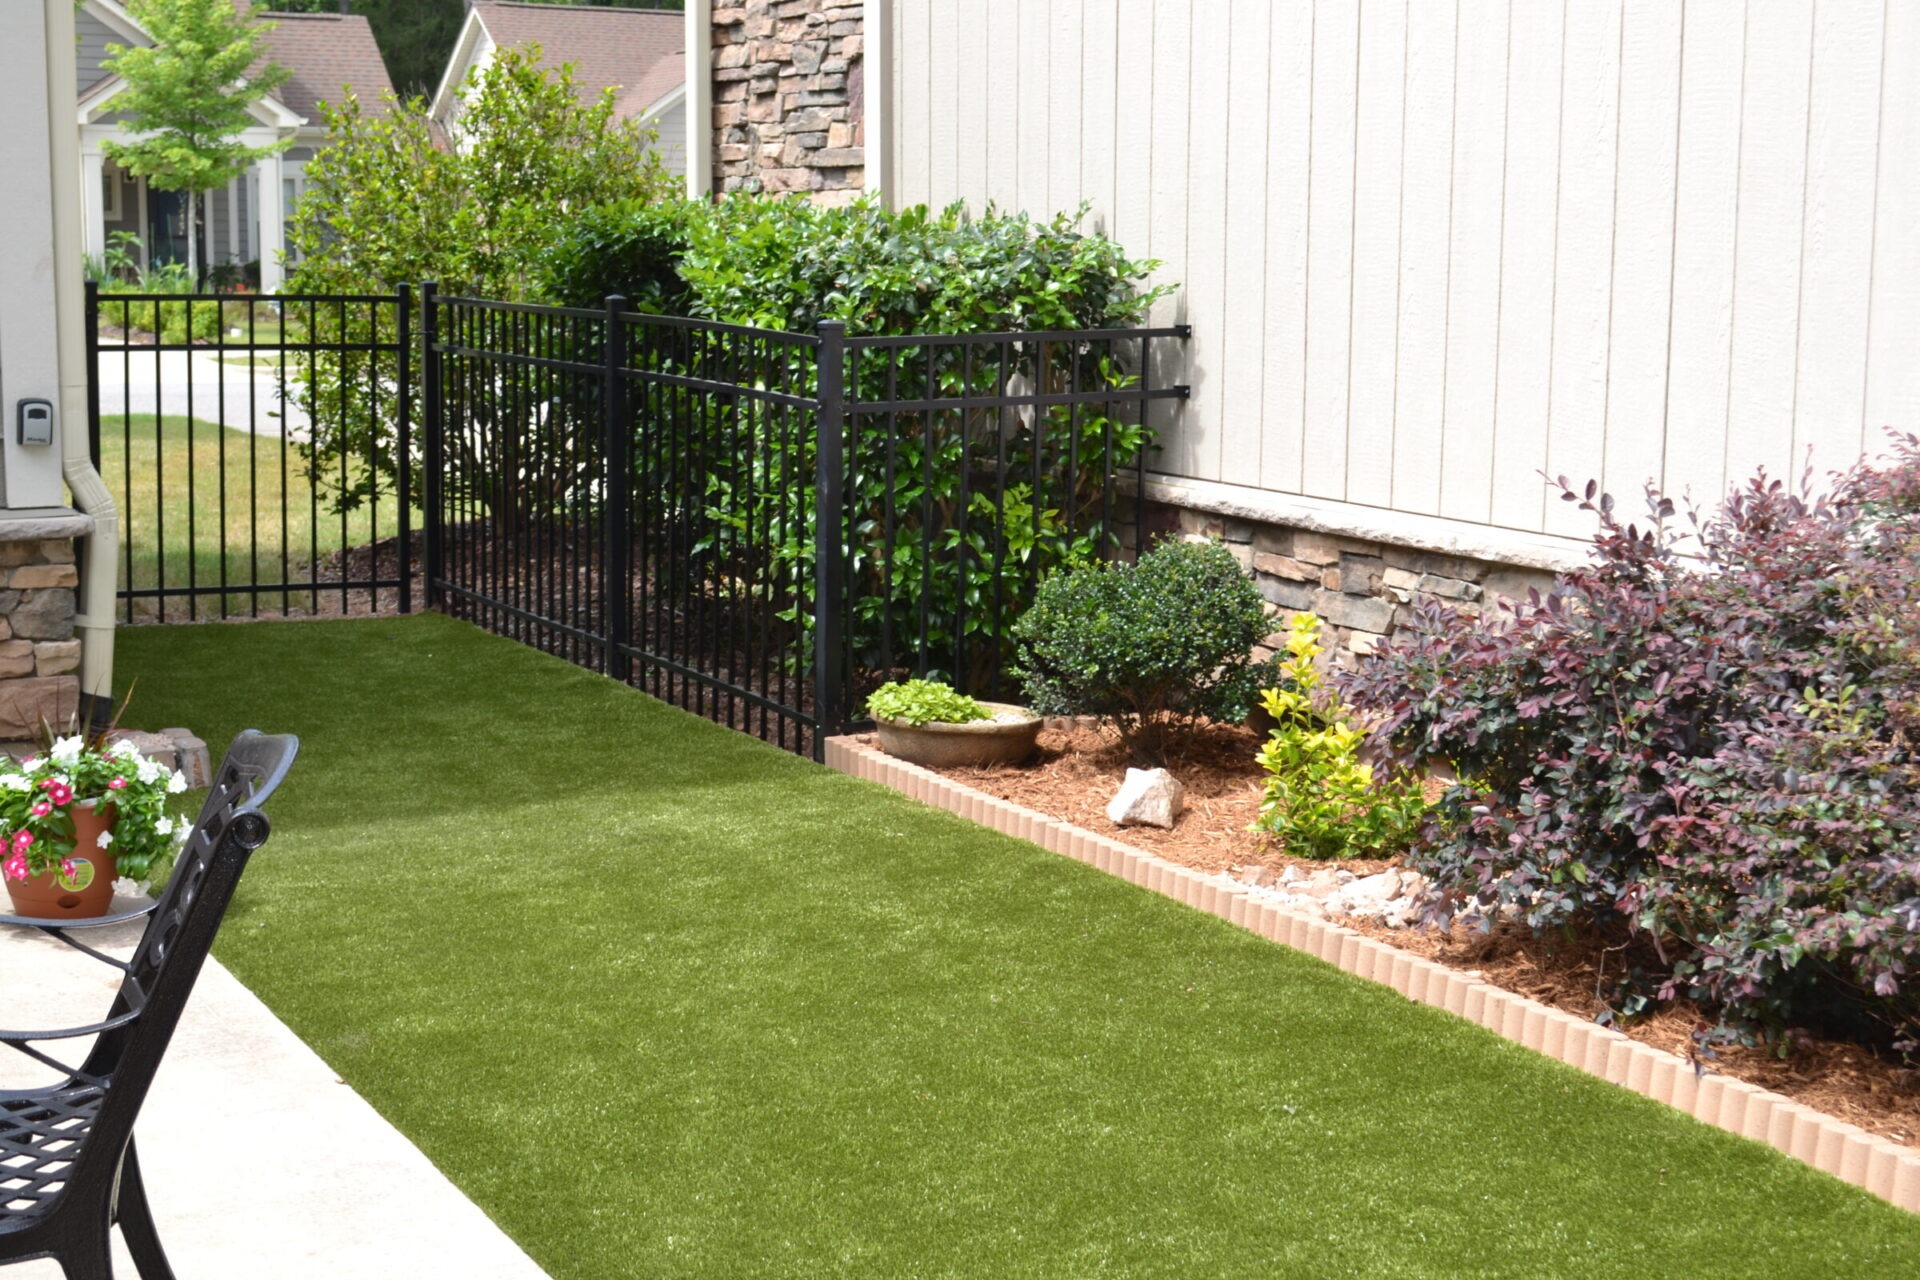 This image shows a well-manicured garden with artificial grass, a black iron fence, varied shrubs, and a stone and siding house facade.